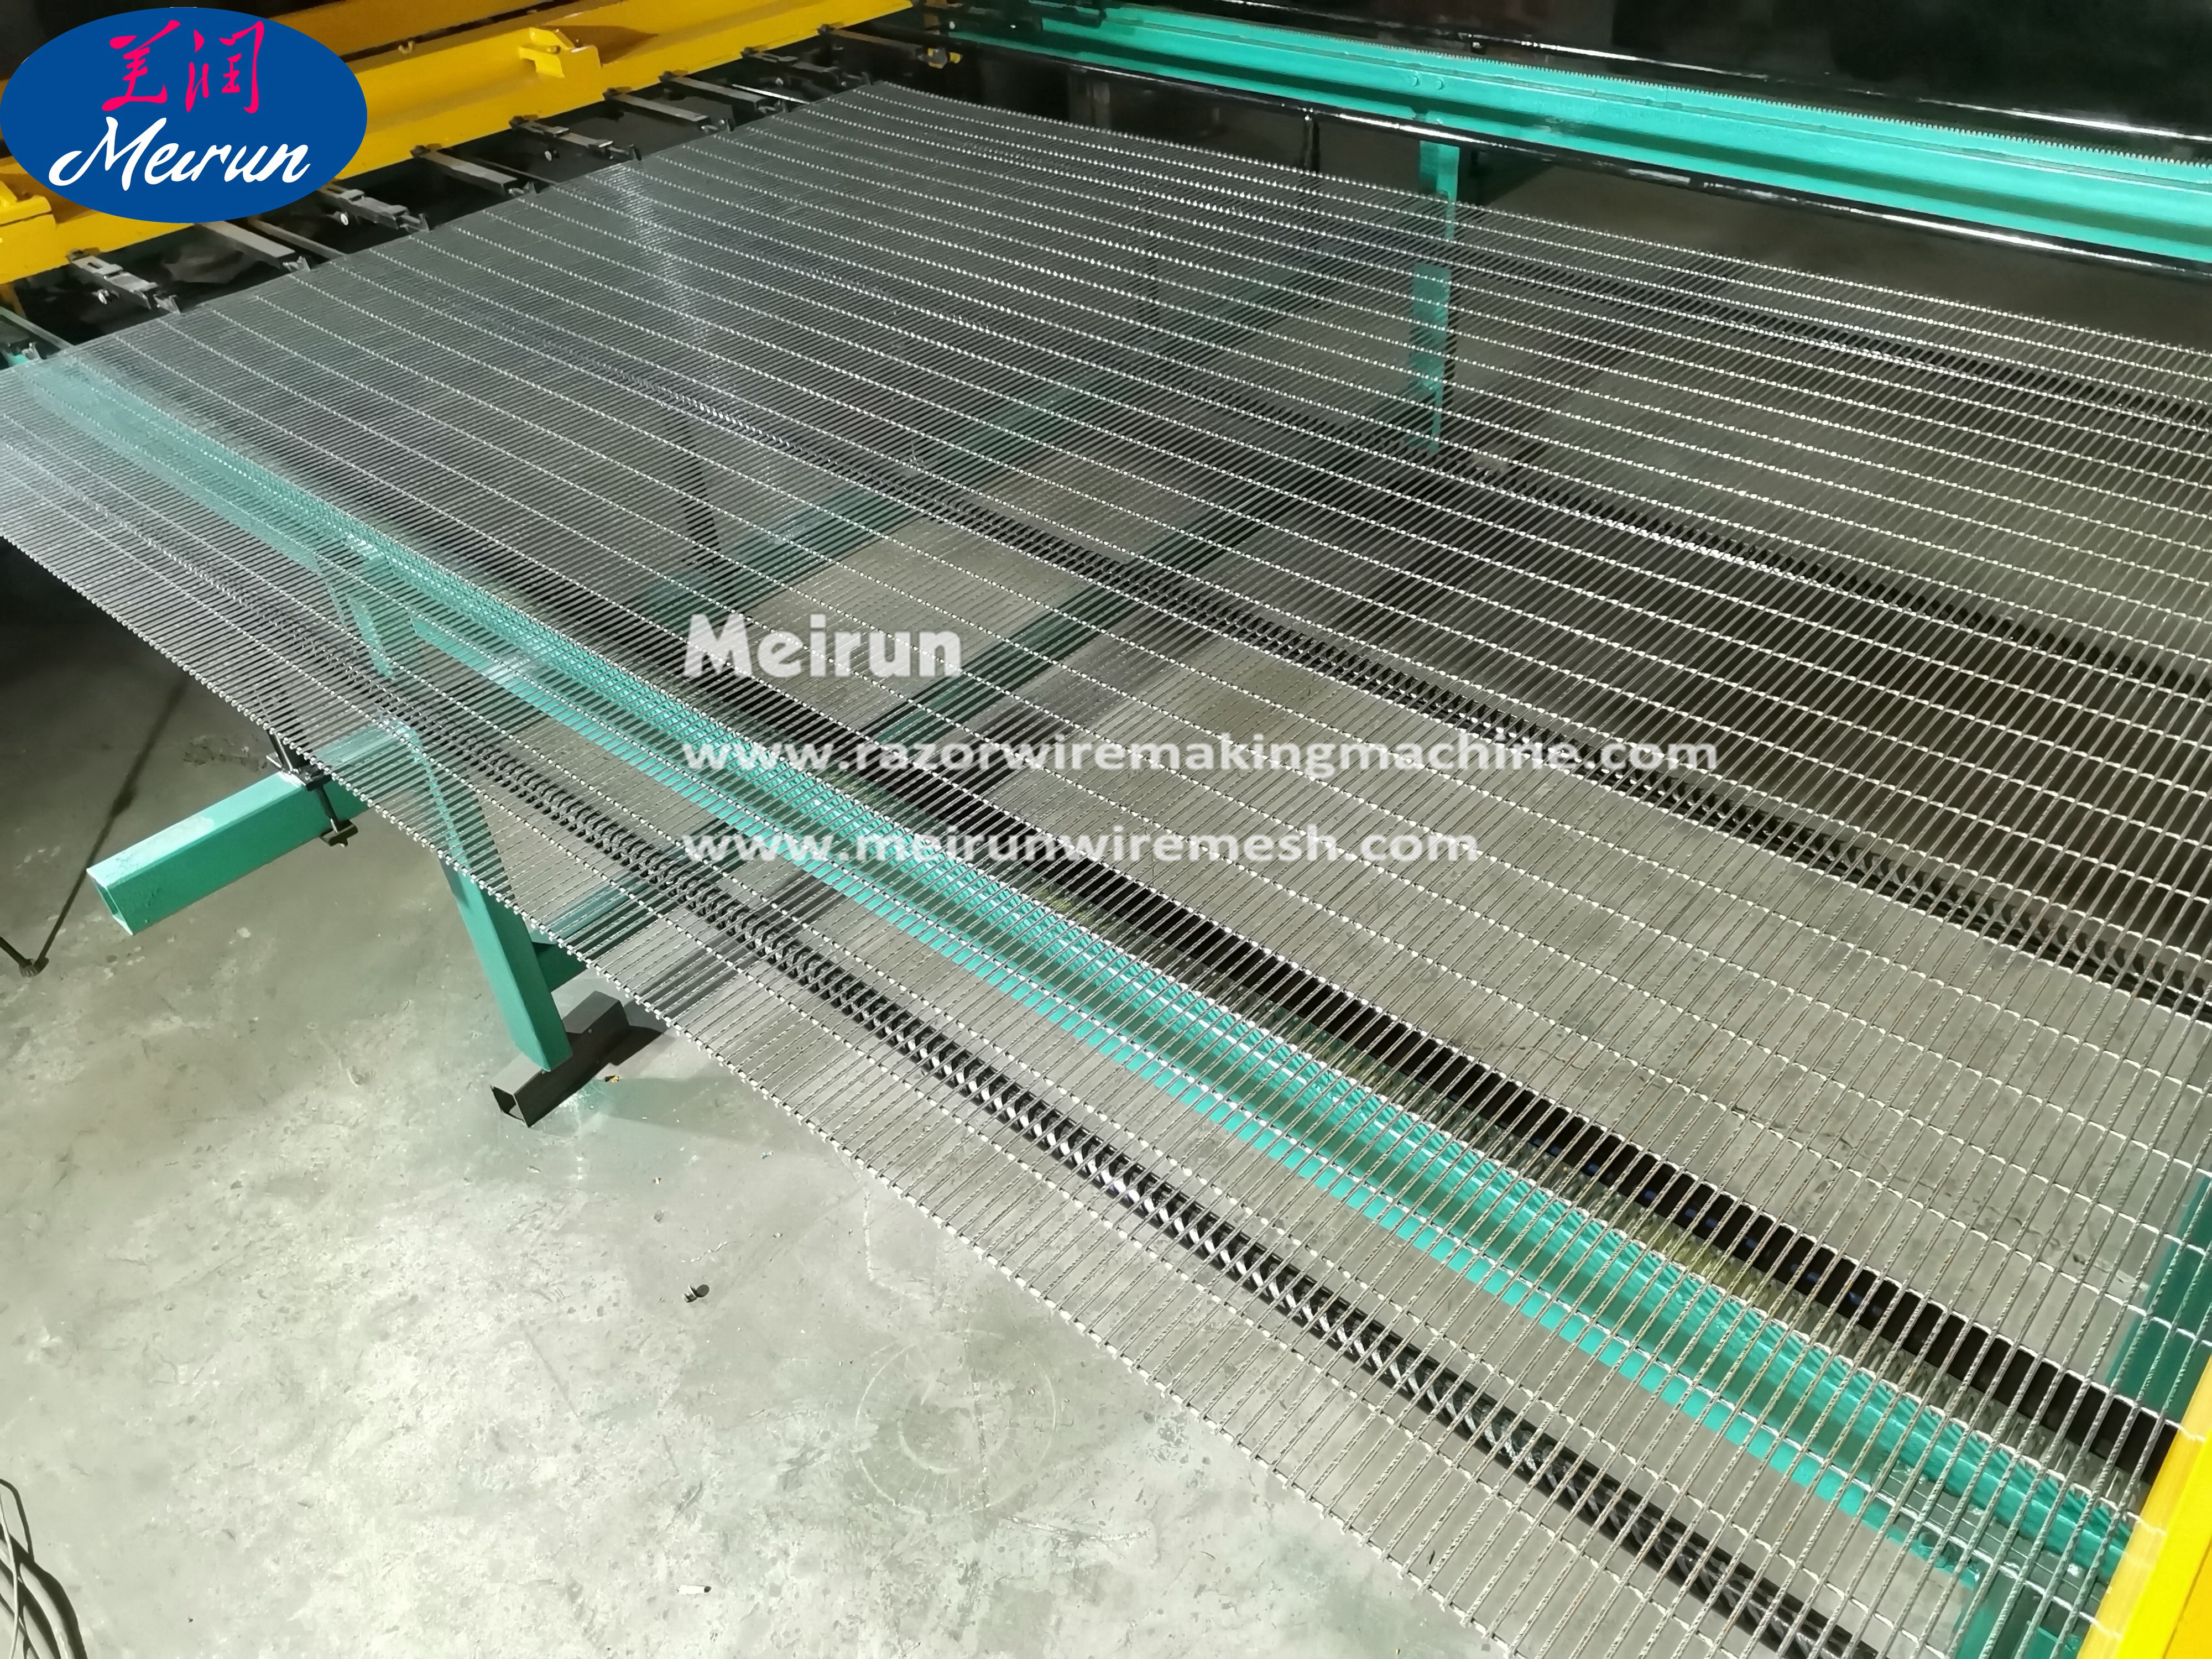 Superior Quality 358 Fence Wire Mesh Welding Machine Anti-climb Wire Fence Boundary Wall Fence